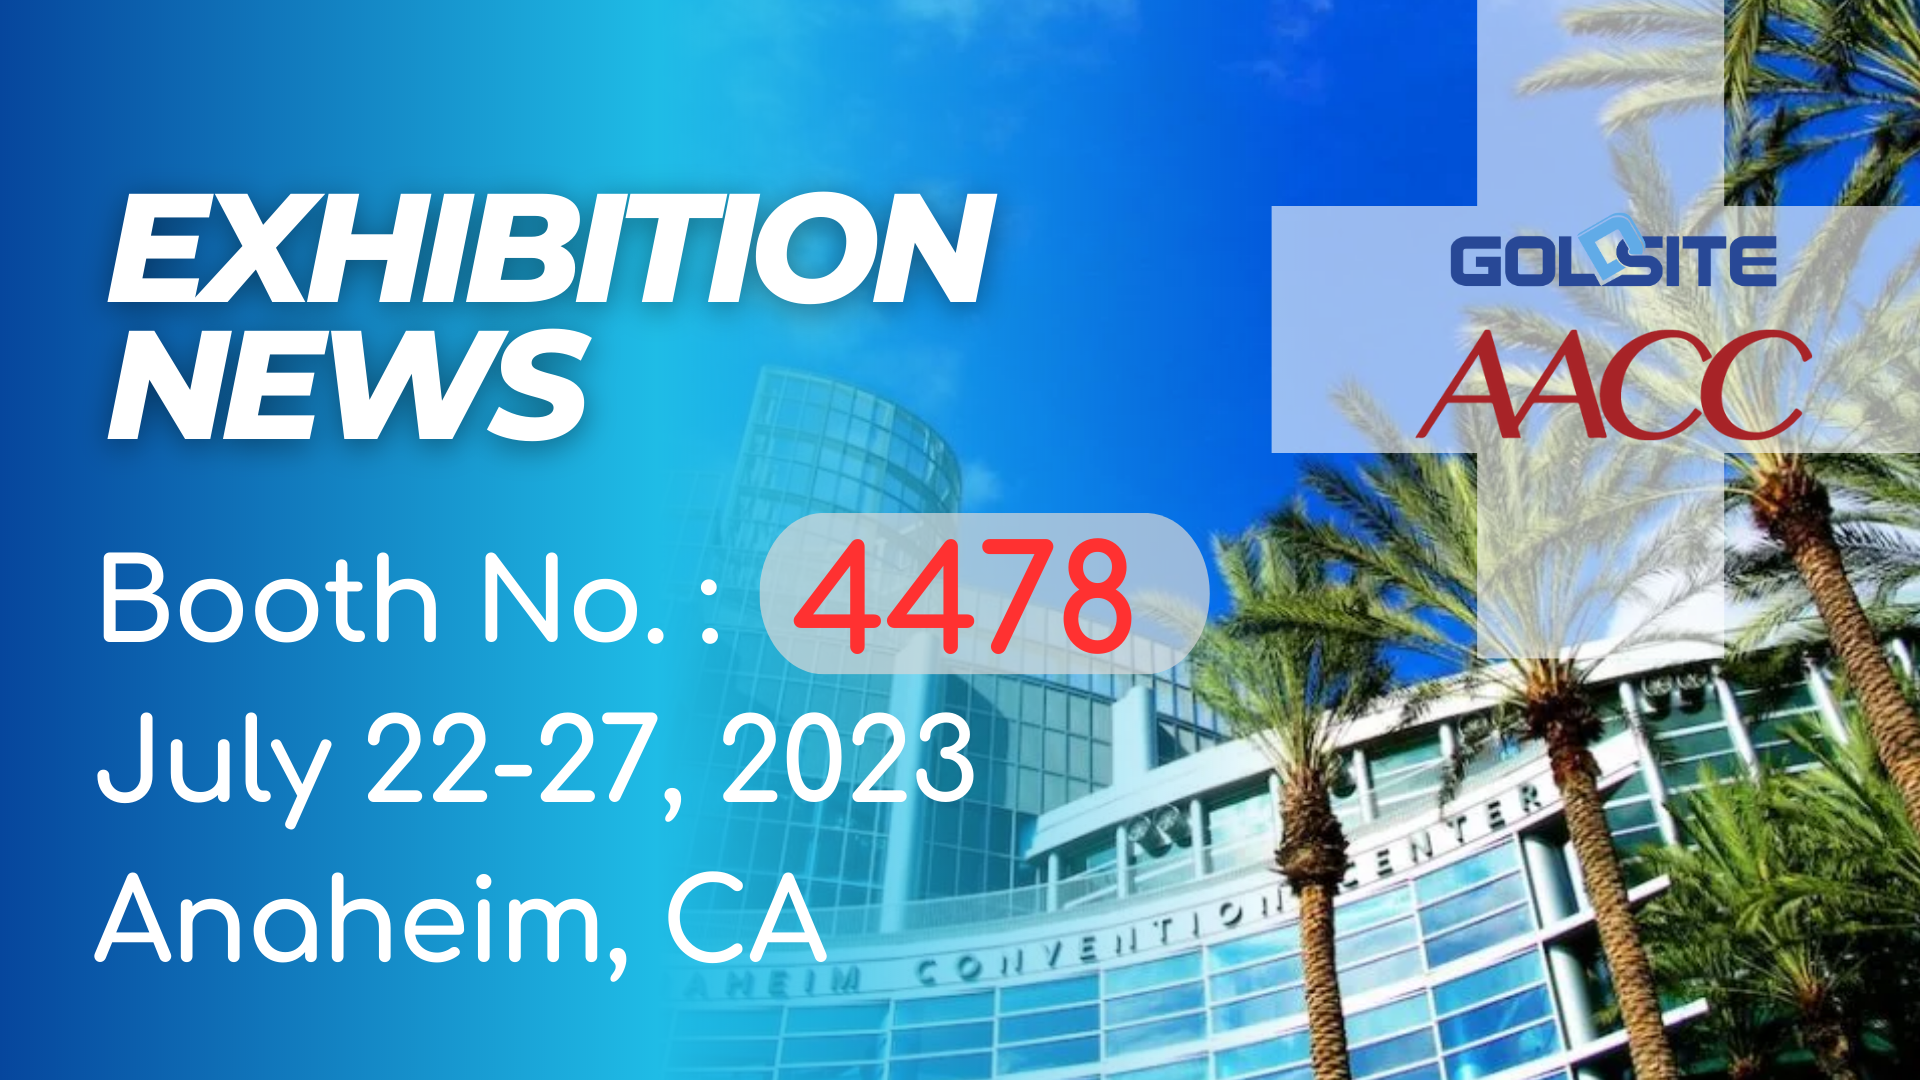 Upcoming Events: Goldsite to exhibit at AACC 2023 in CA!